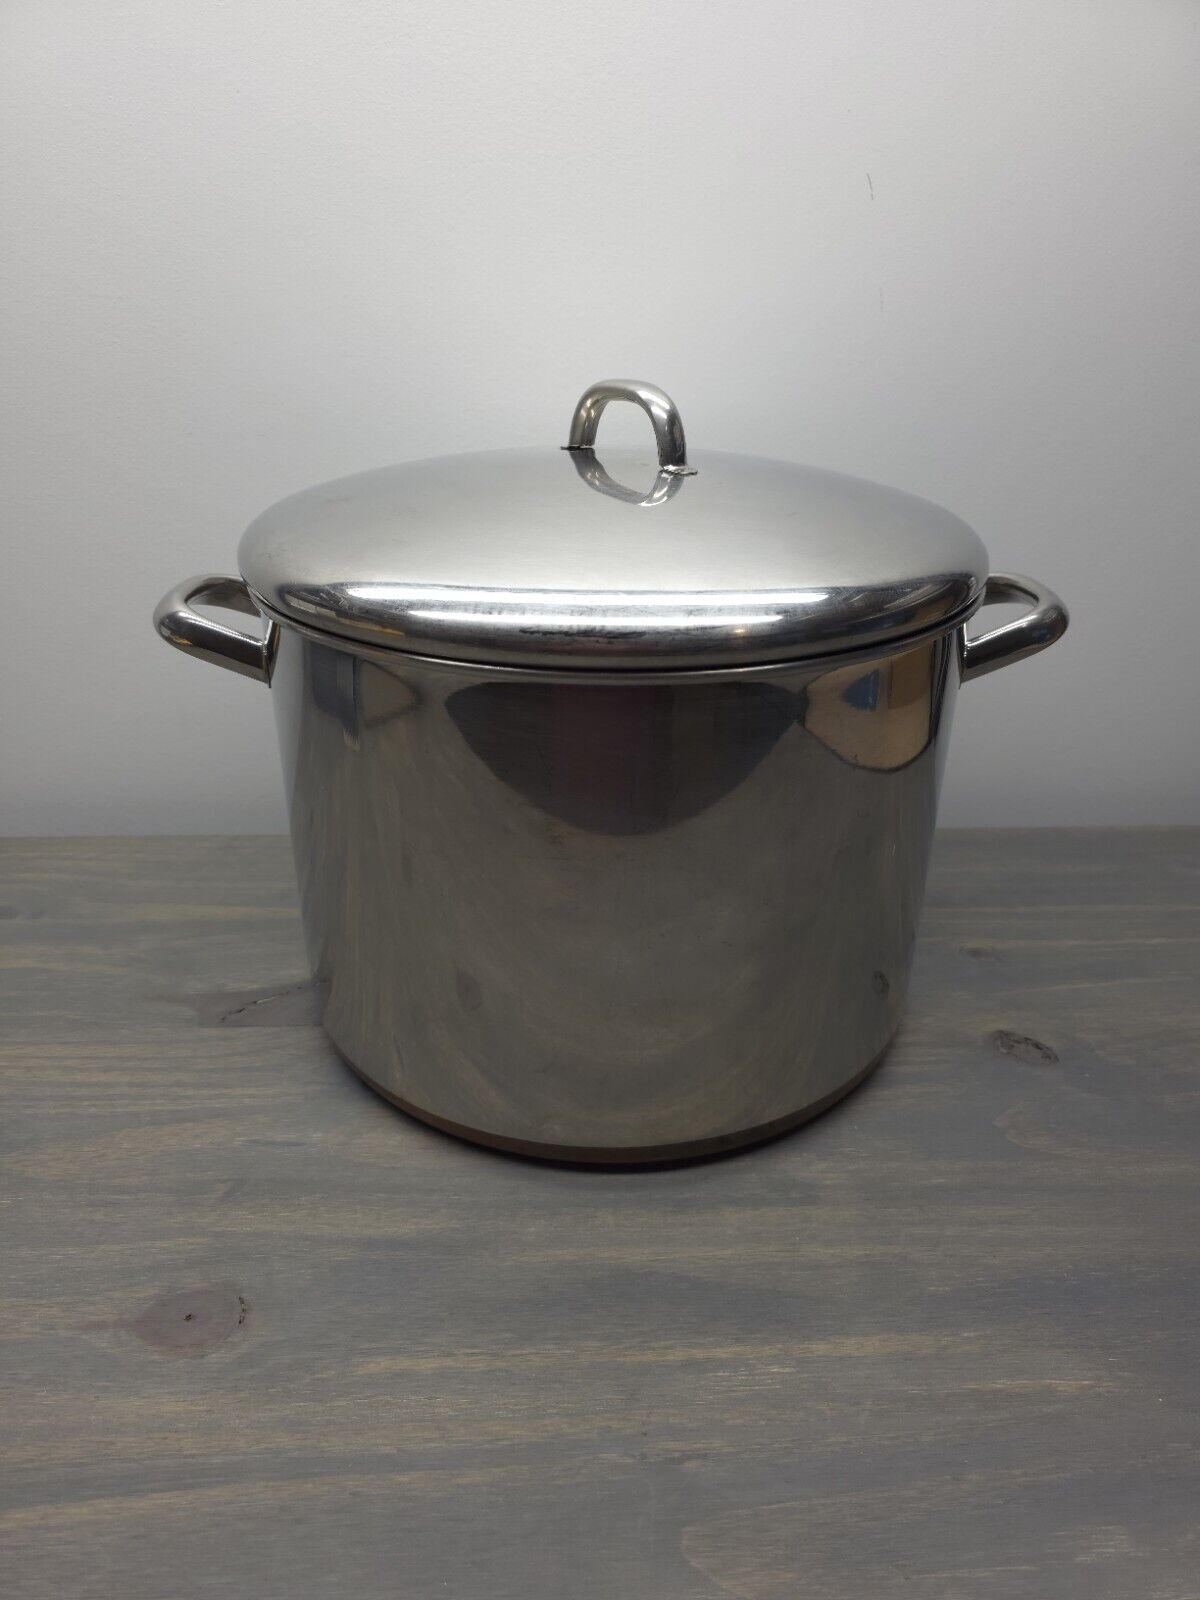 Vintage Revere Ware 16 Qt Stock Pot with Lid Stainless Steel With Copper Bottom